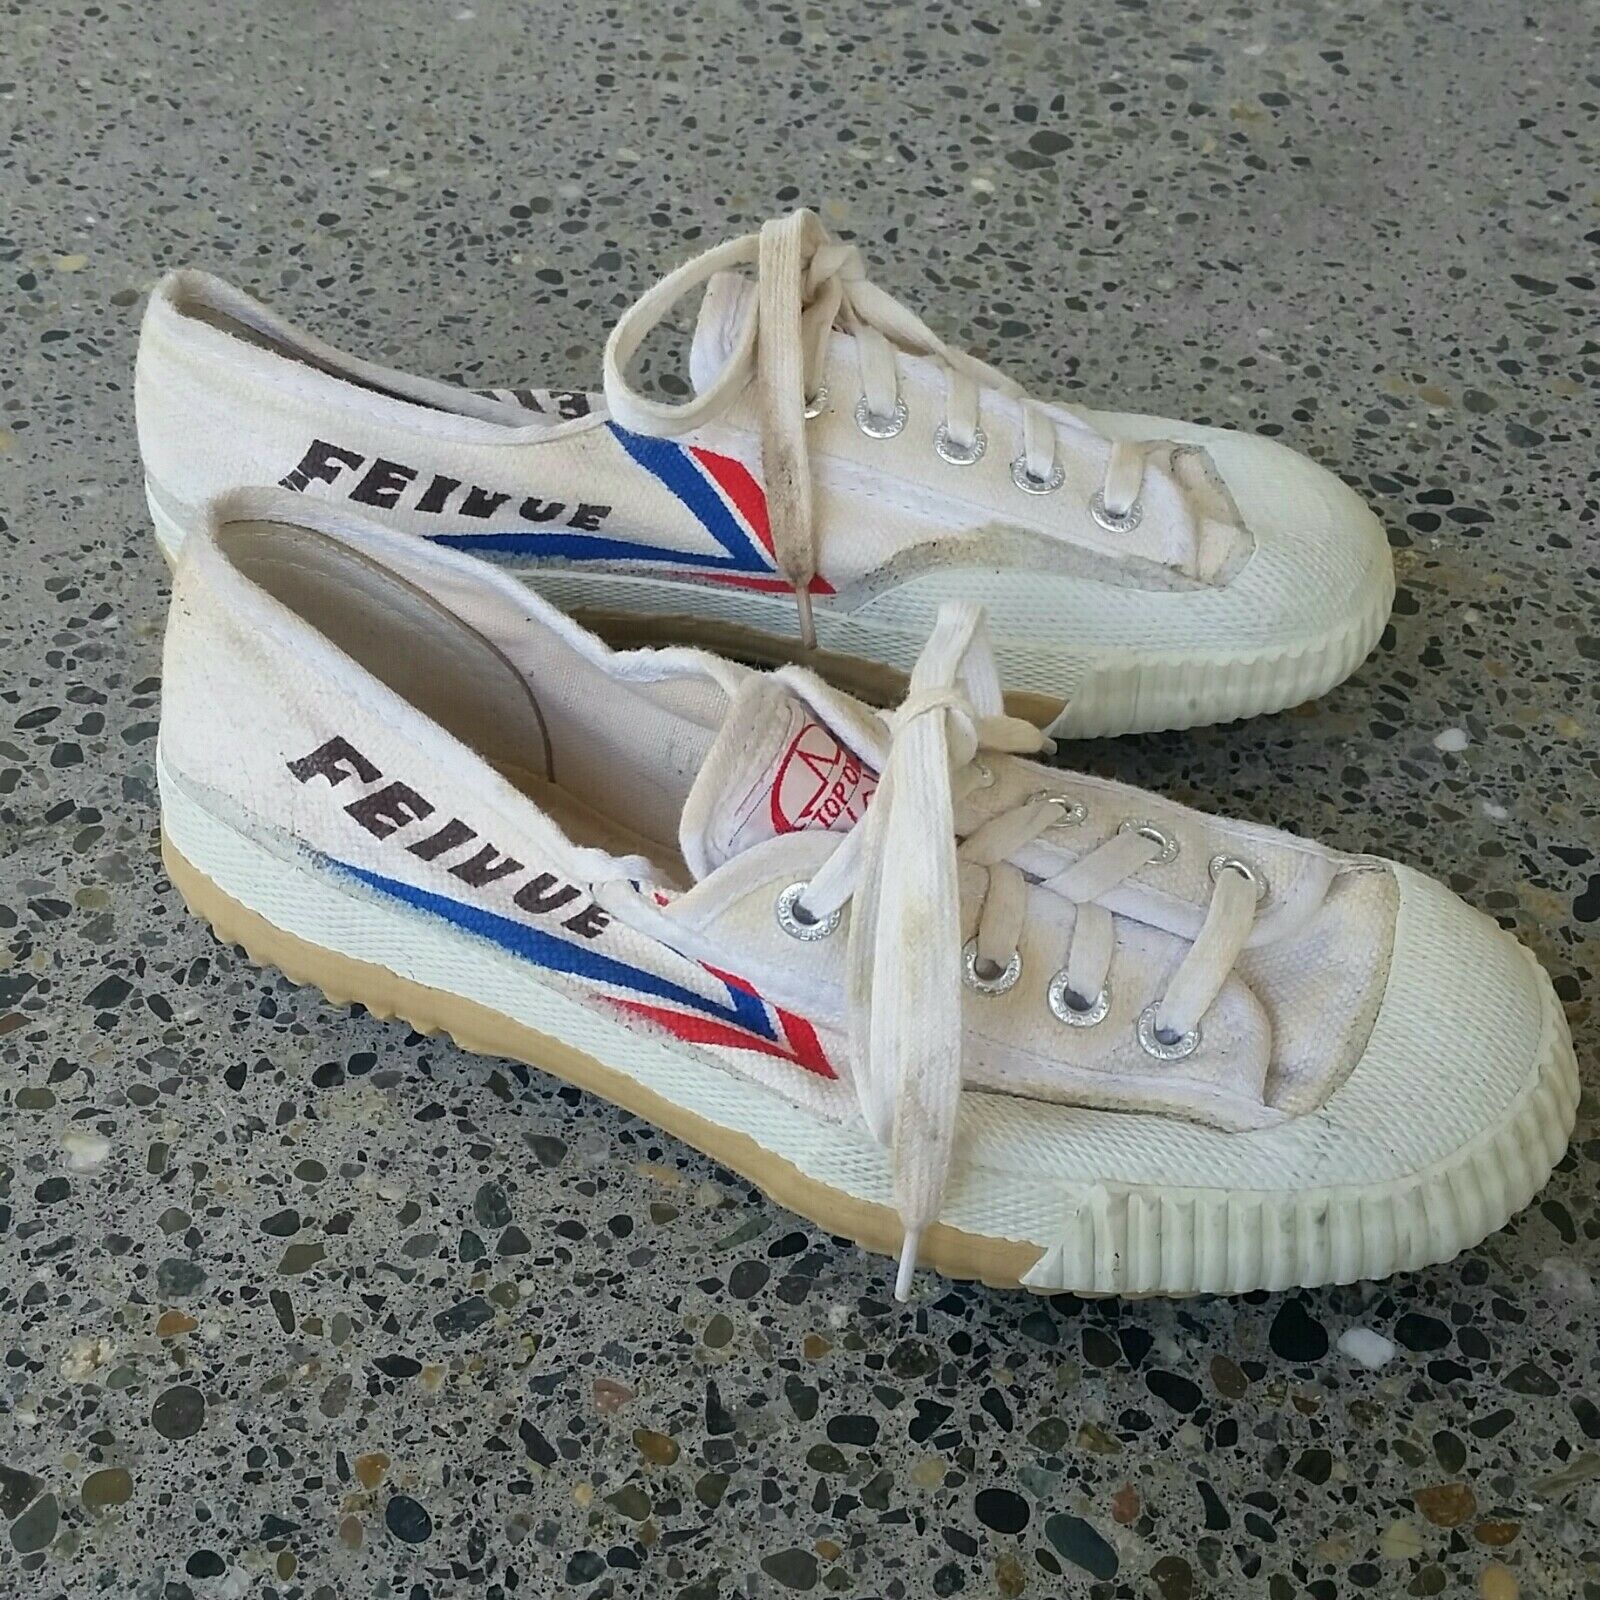 Feivue Feiyue Top One White Martial Arts Canvas Lace Up Shoe Size 37 Used